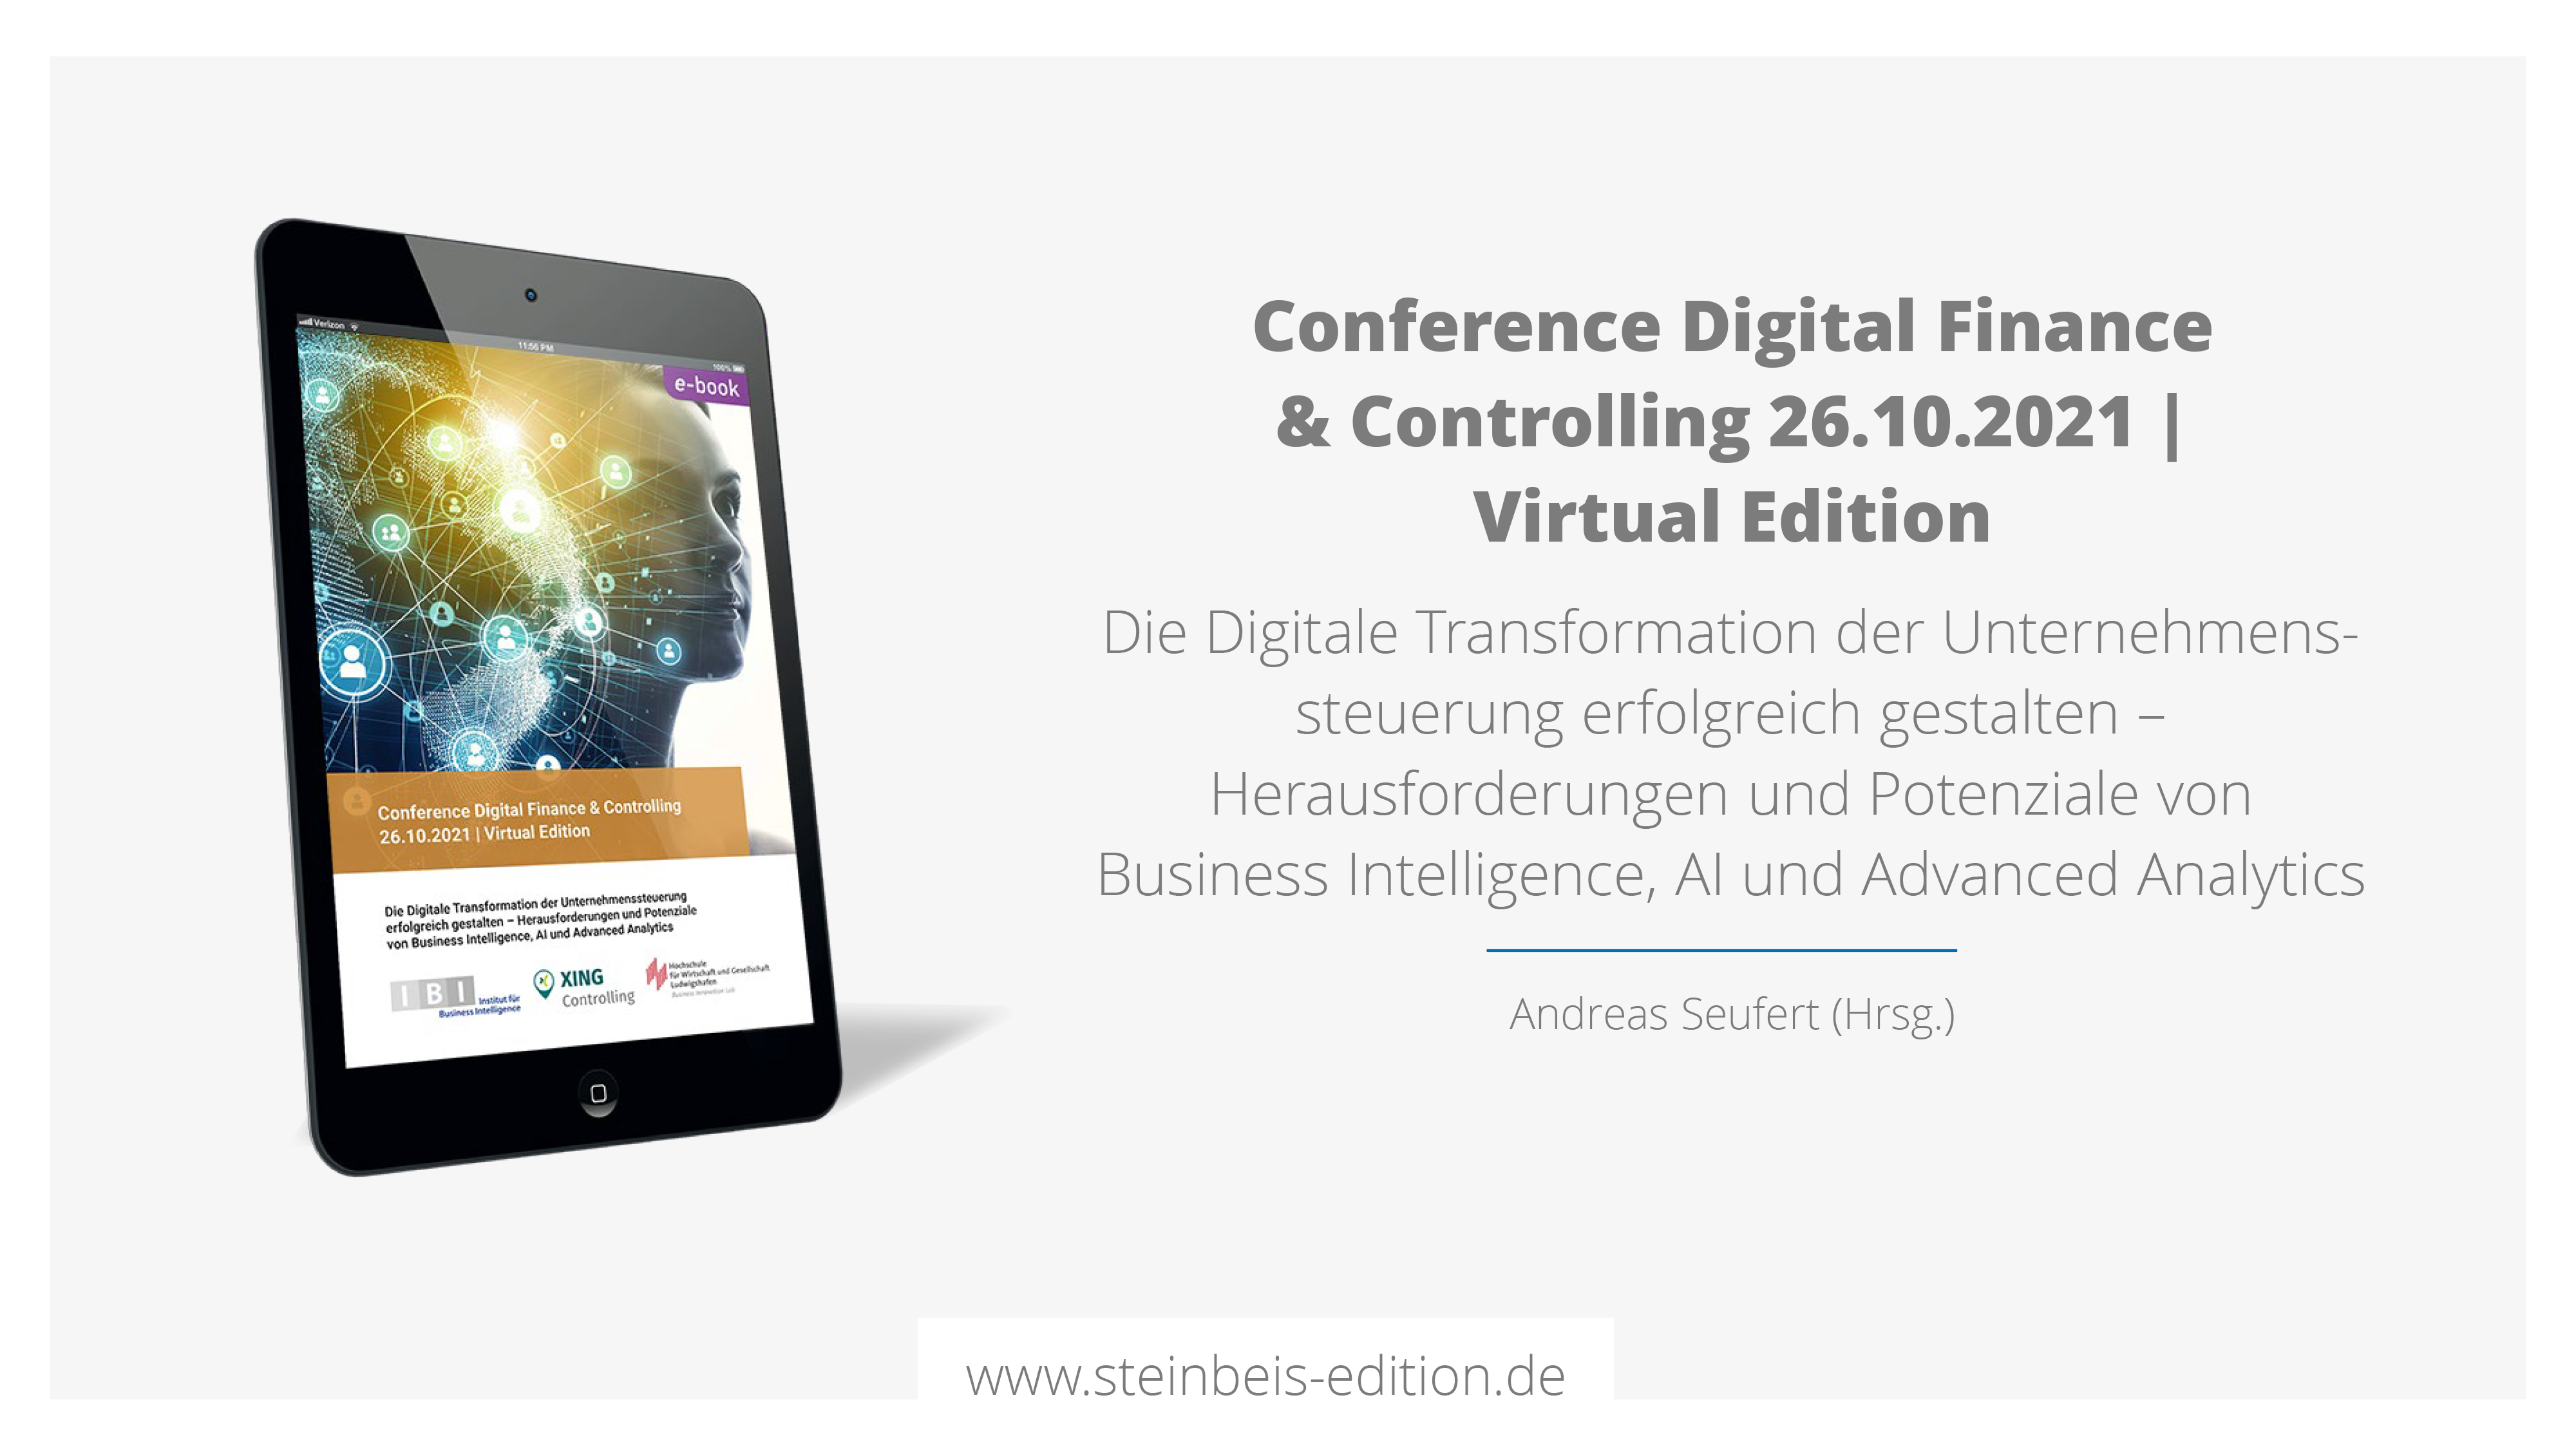 Conference Digital Finance & Controlling 26.10.2021